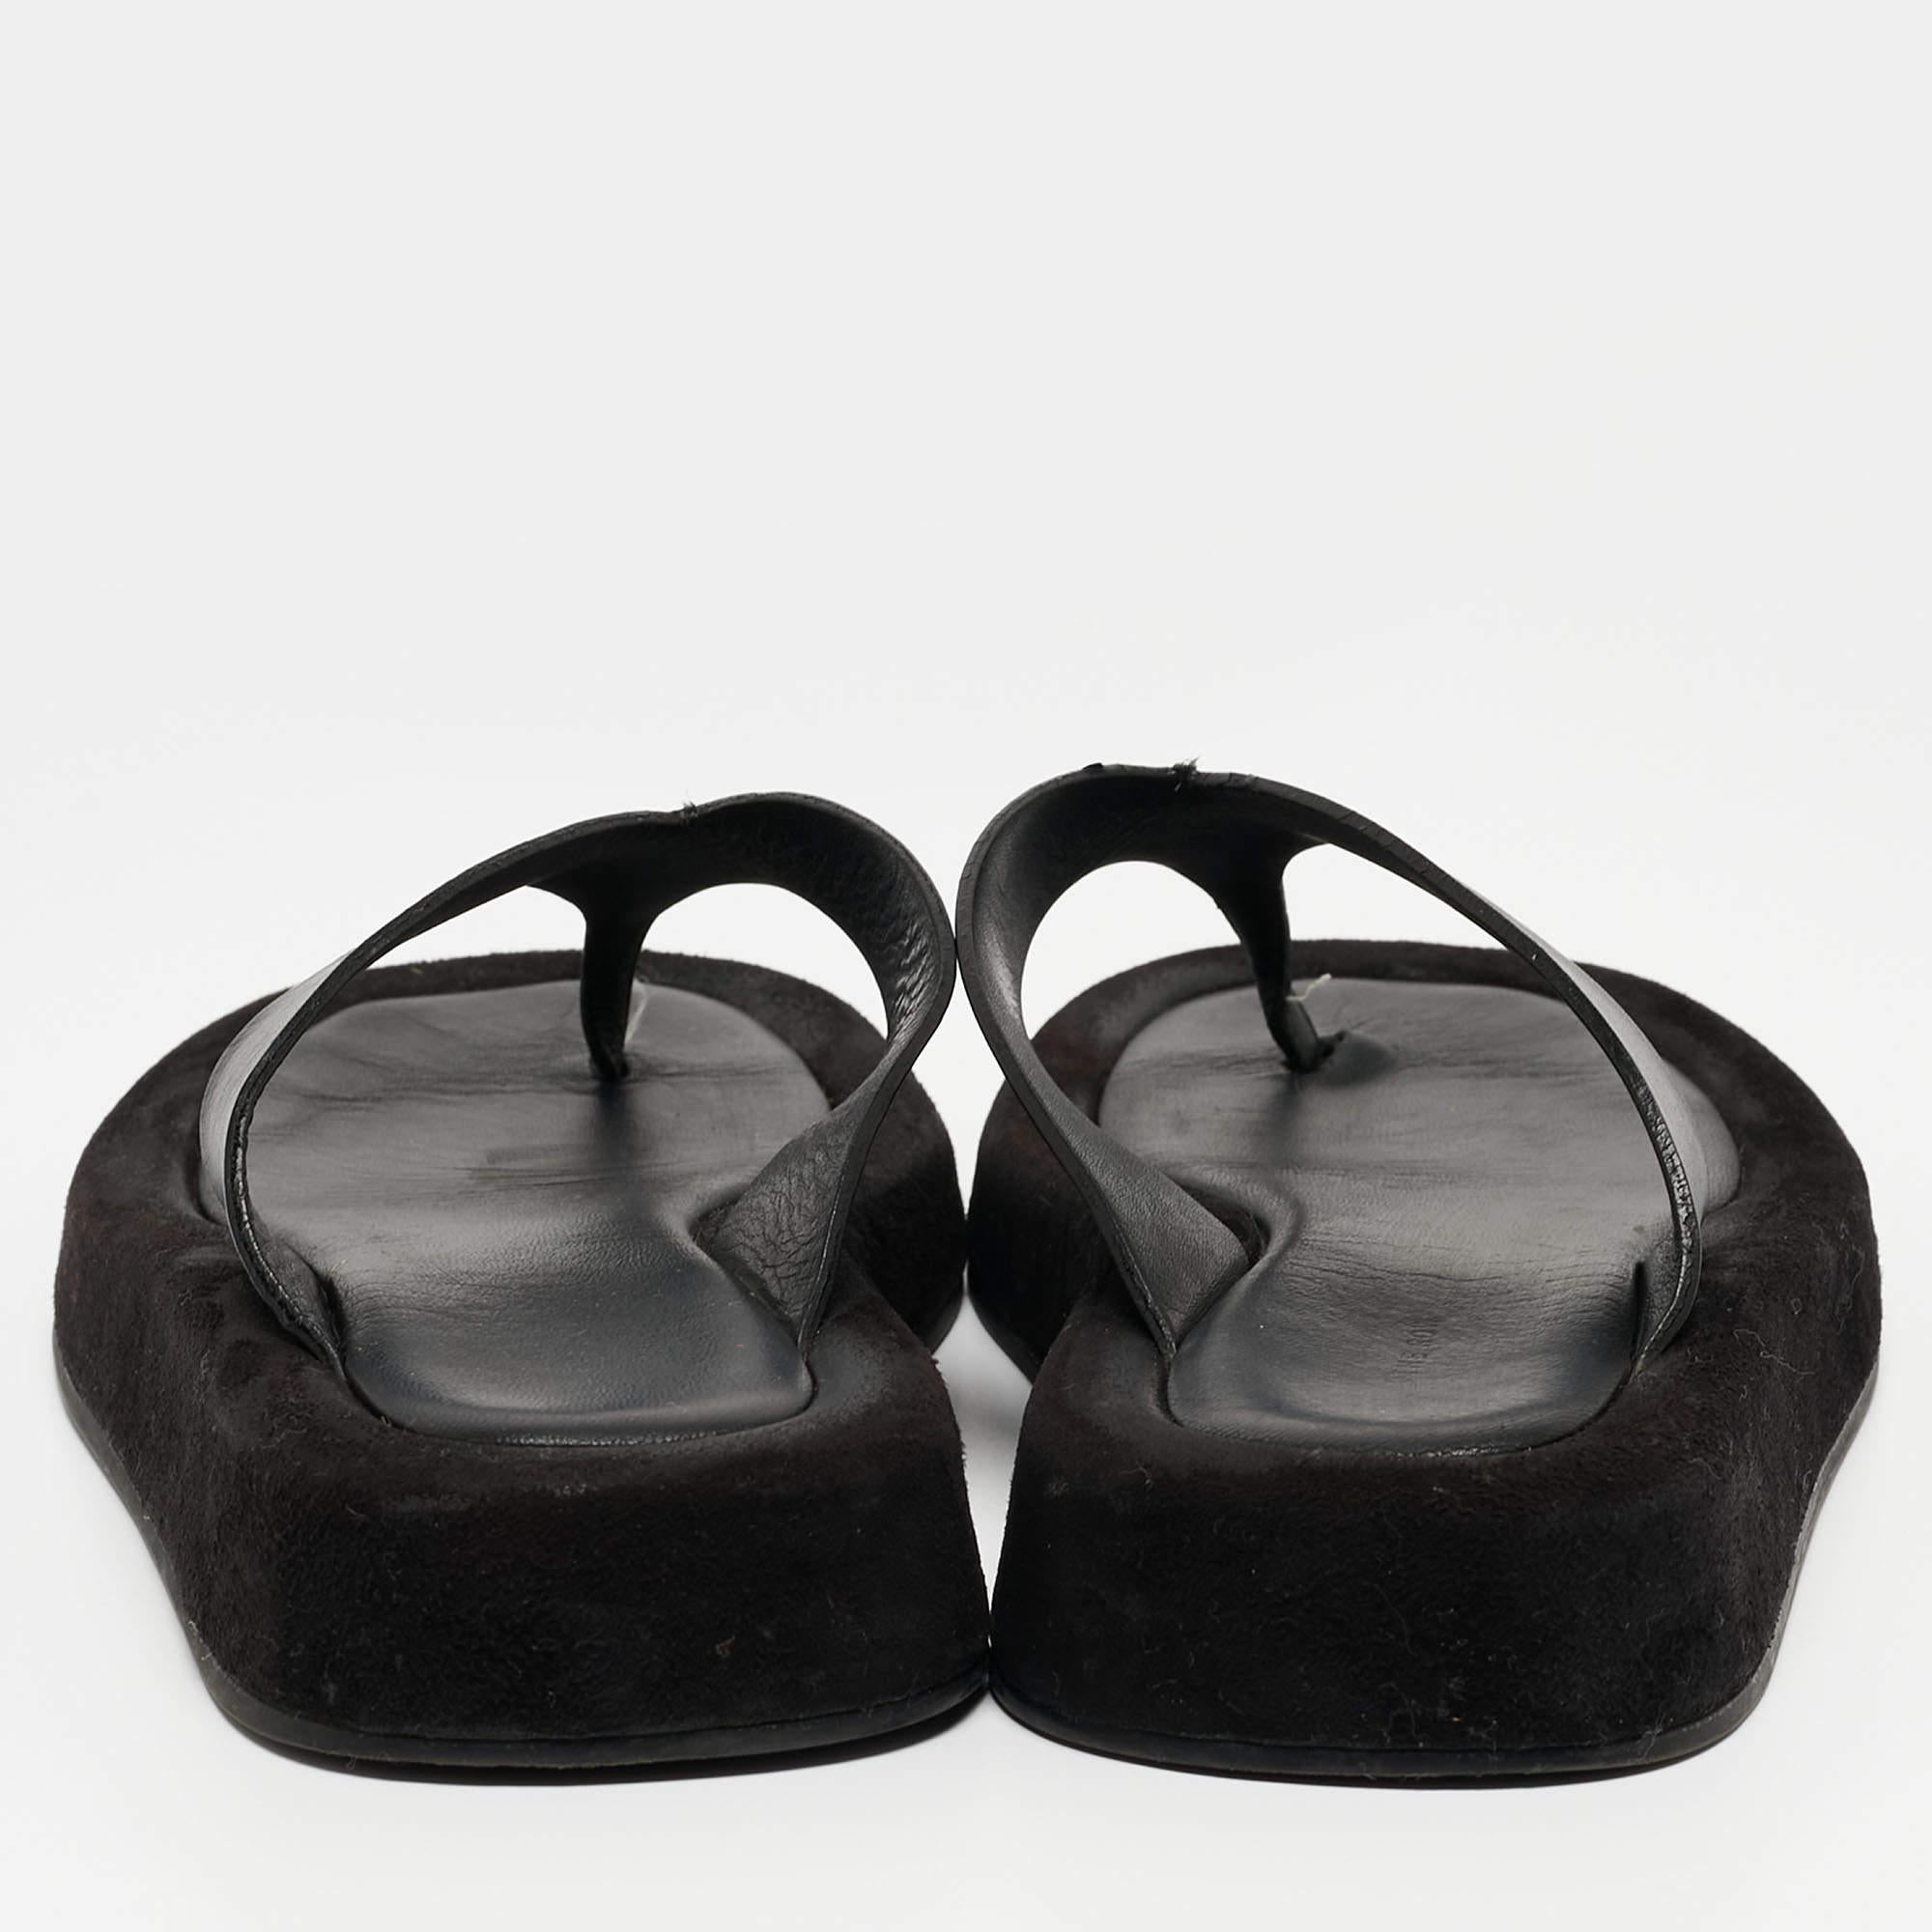 A perfect blend of luxury, style, and comfort, these designer flats are made using quality materials and frame your feet in the most refined way. They can be paired with a host of outfits from your wardrobe.

Includes: Original Dustbag